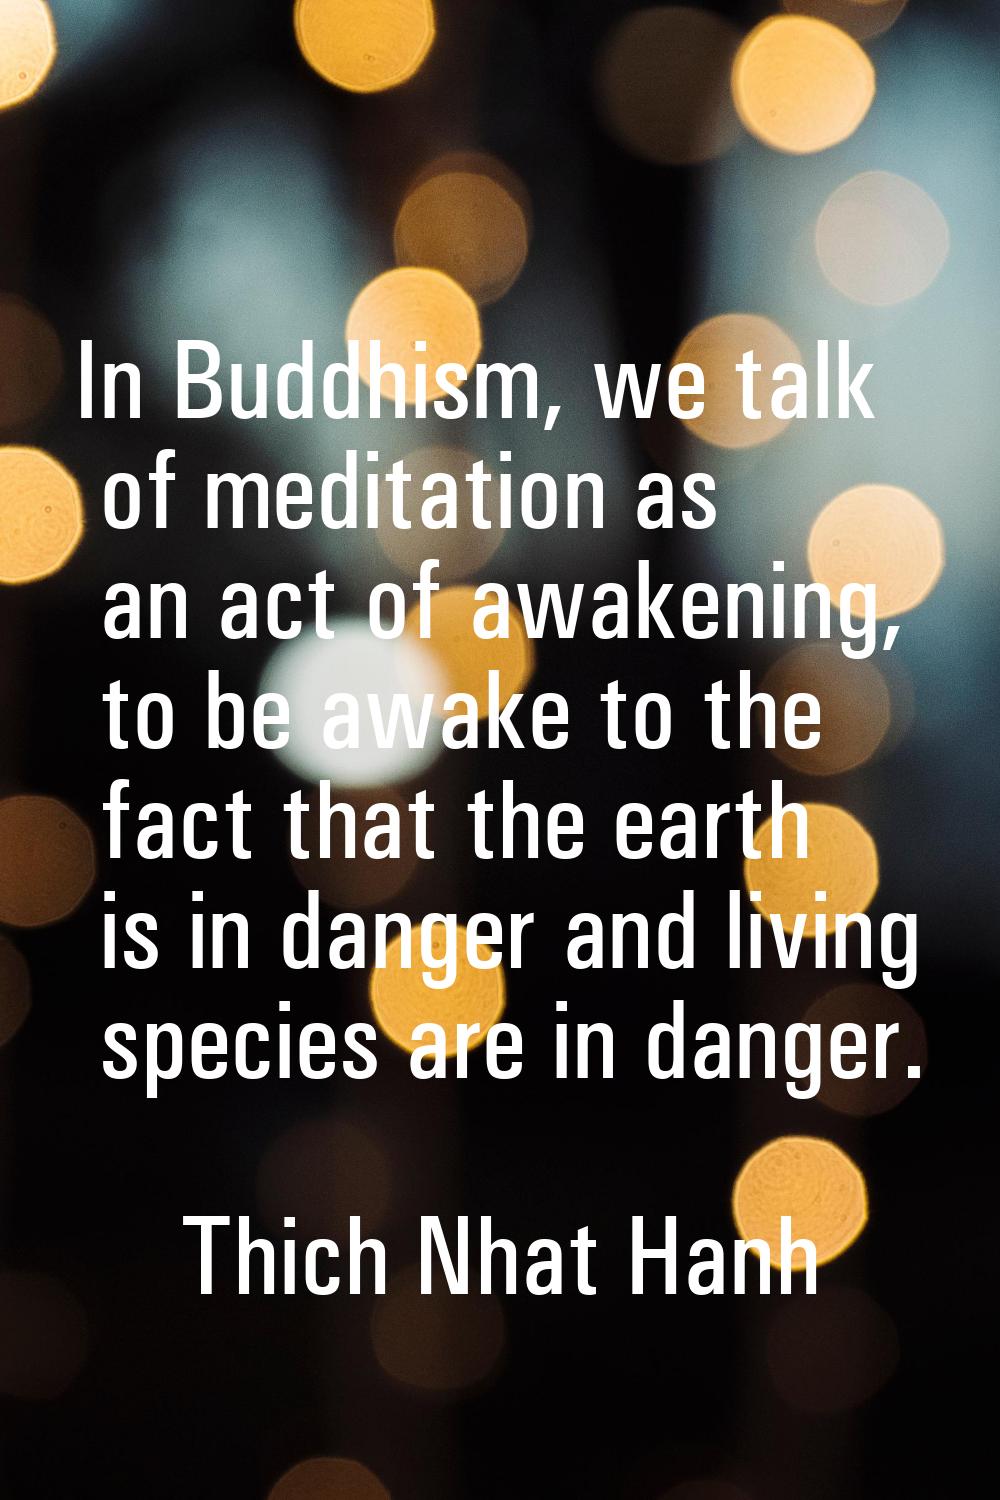 In Buddhism, we talk of meditation as an act of awakening, to be awake to the fact that the earth i